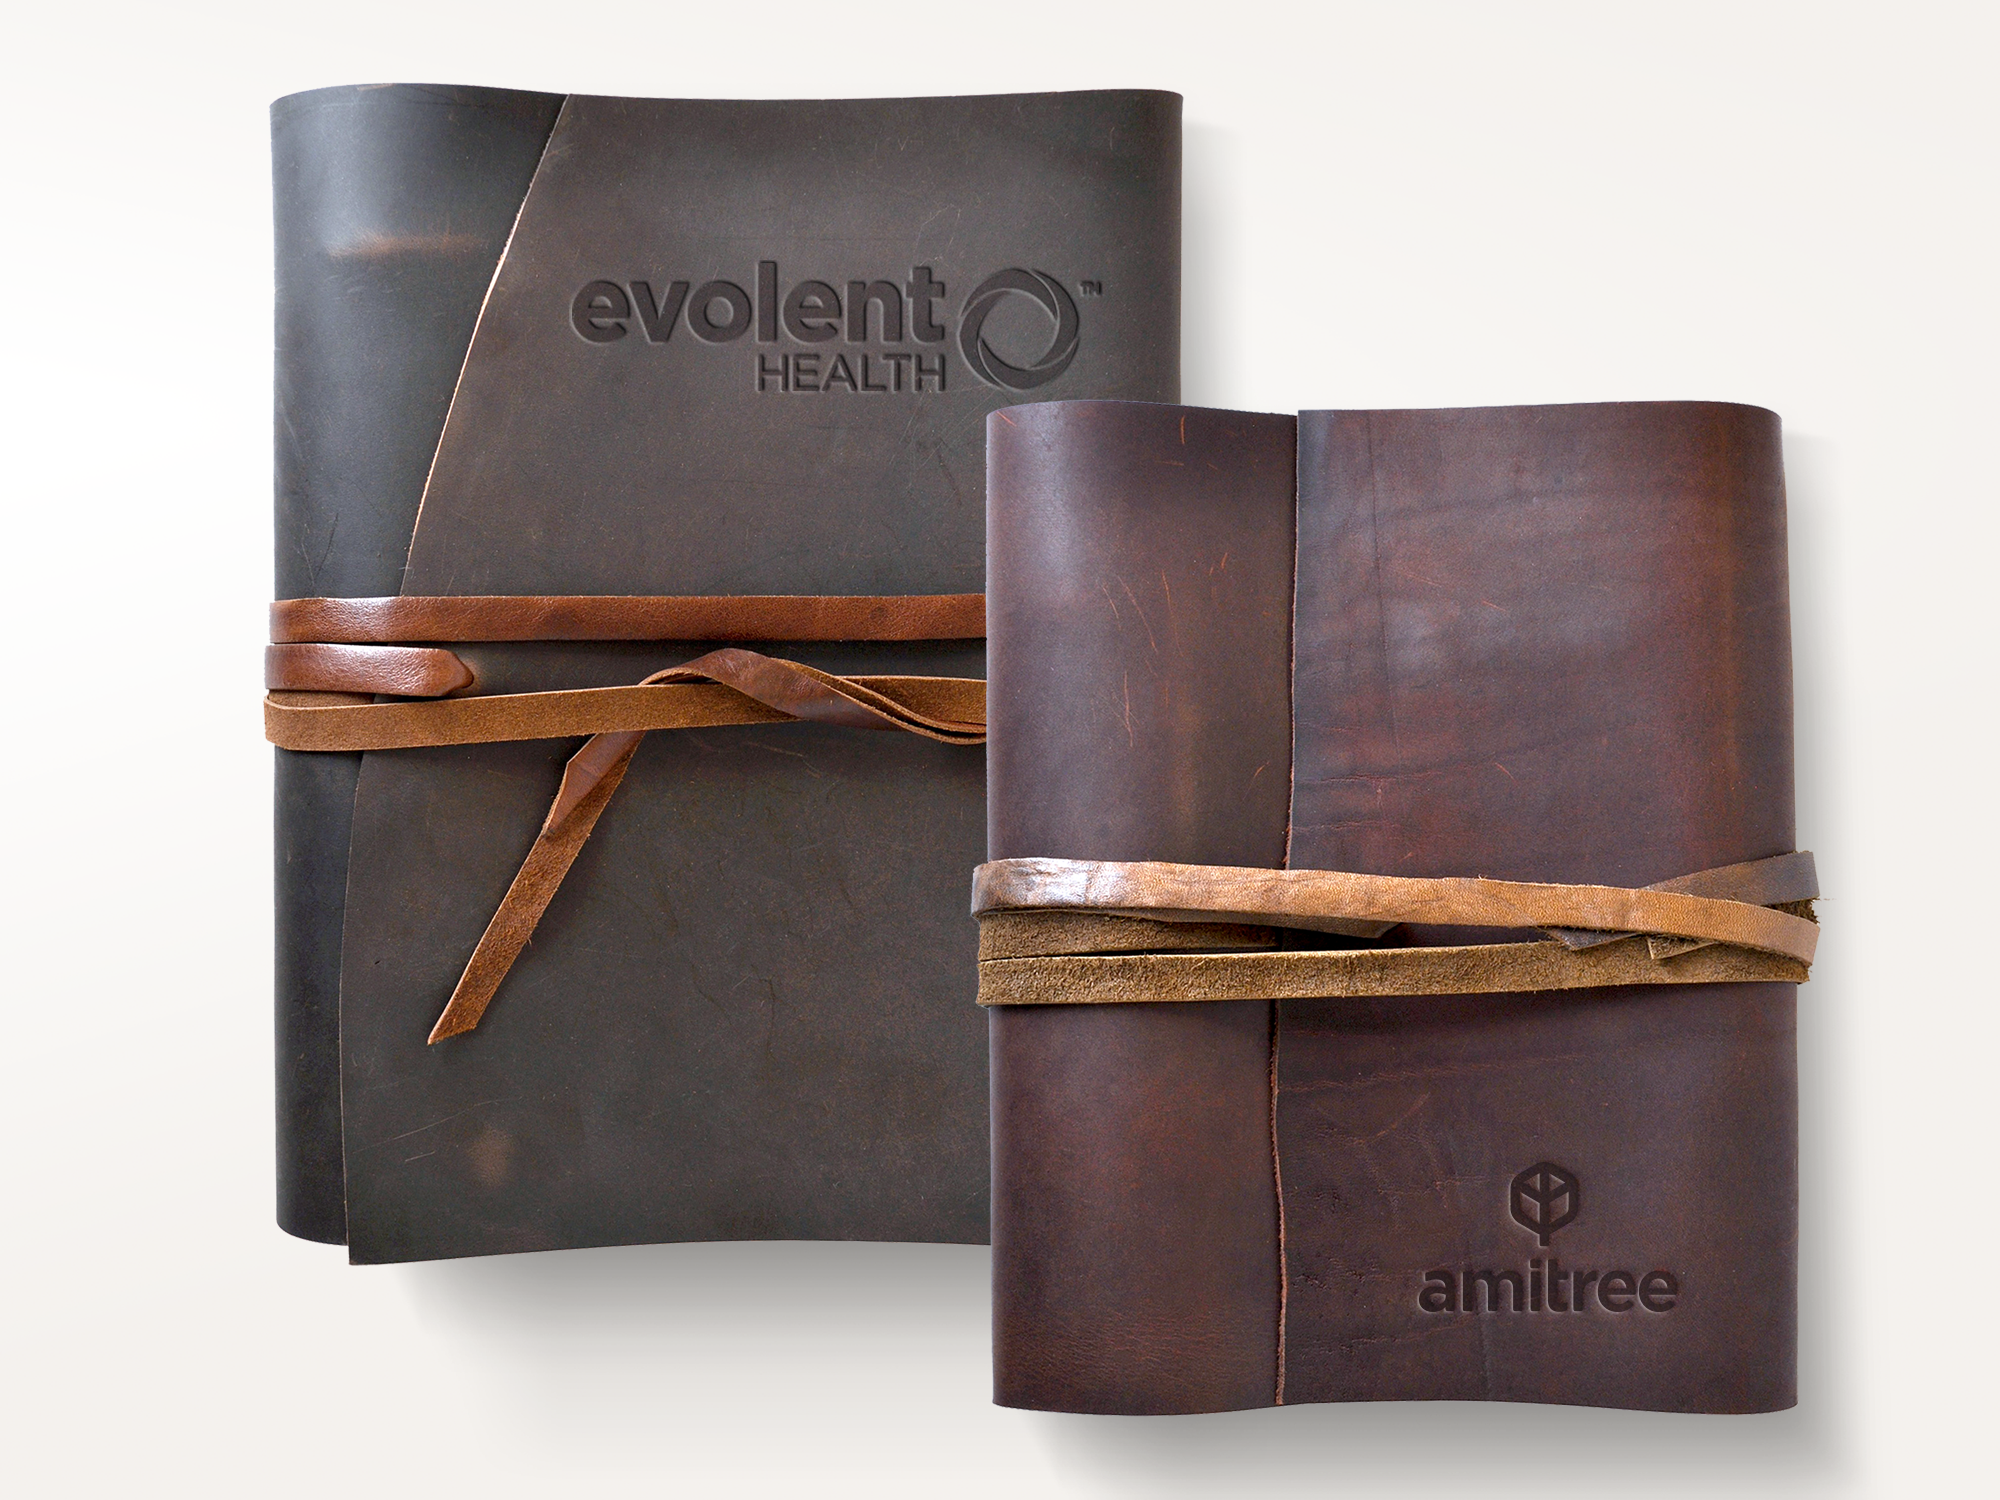 Leather 3 Ring Photo Album  Buy a Soft Leather 3 Ring Binder